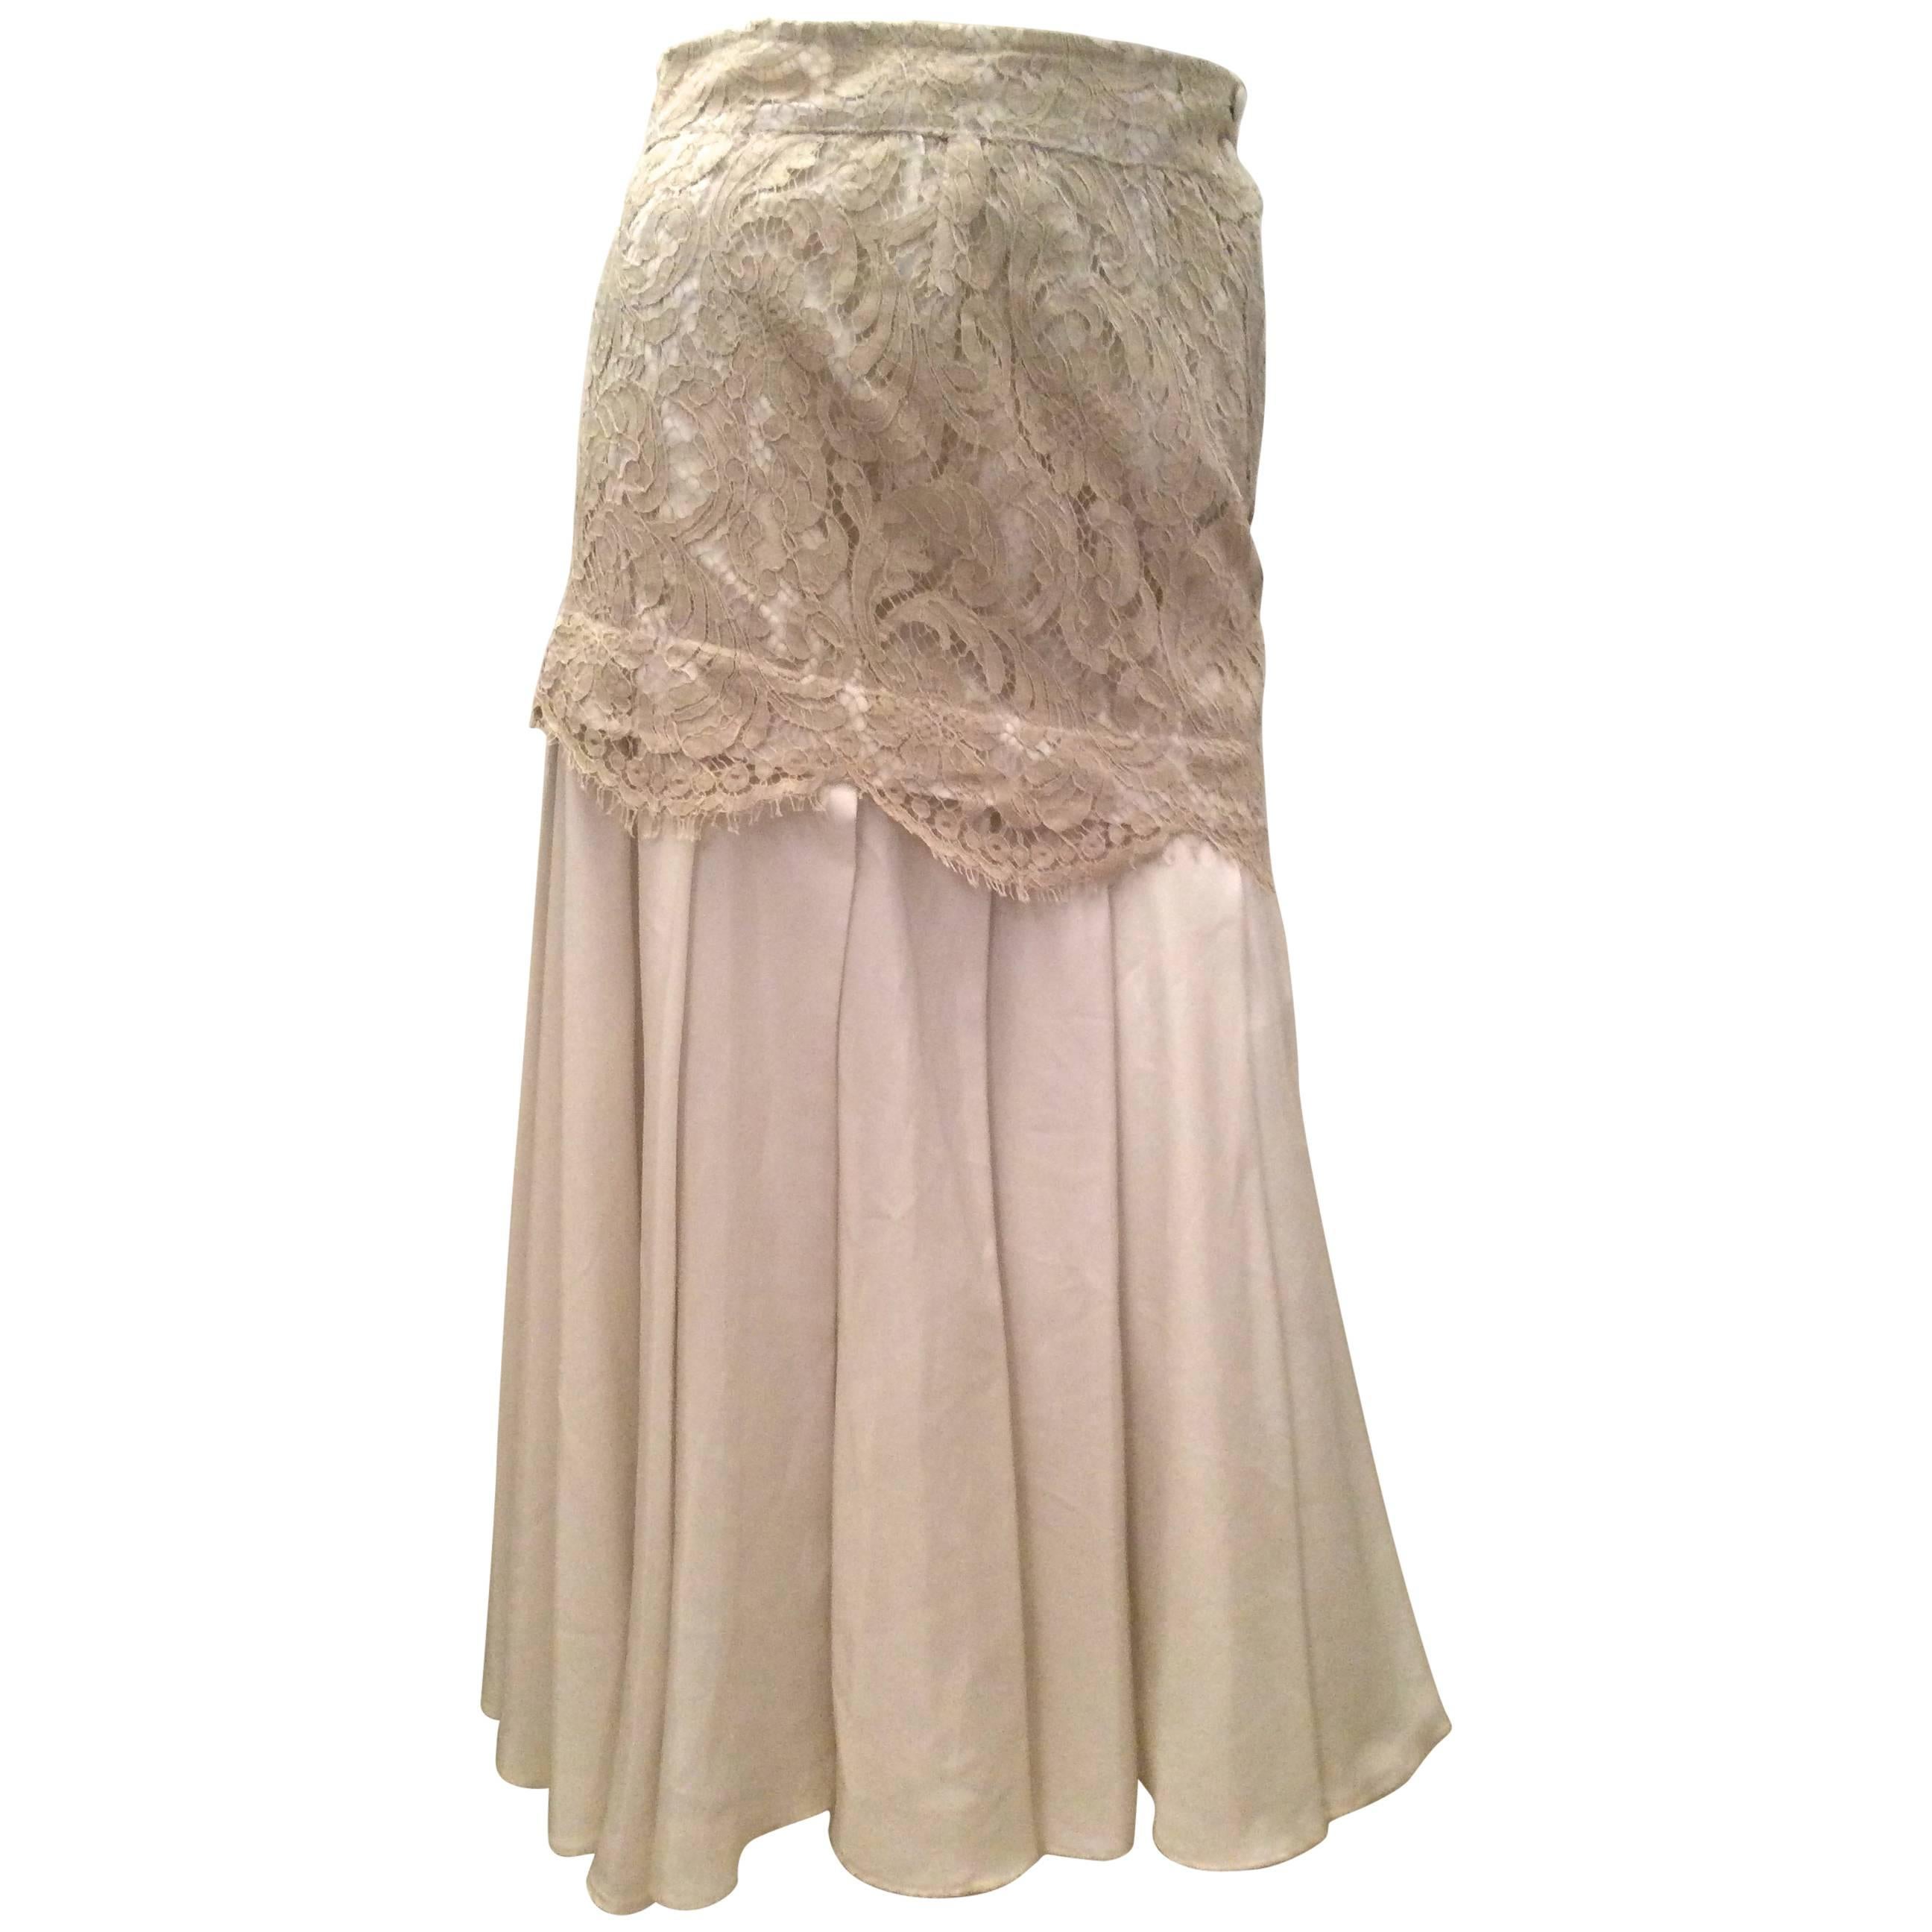 Lace Cocktail Skirt For Sale